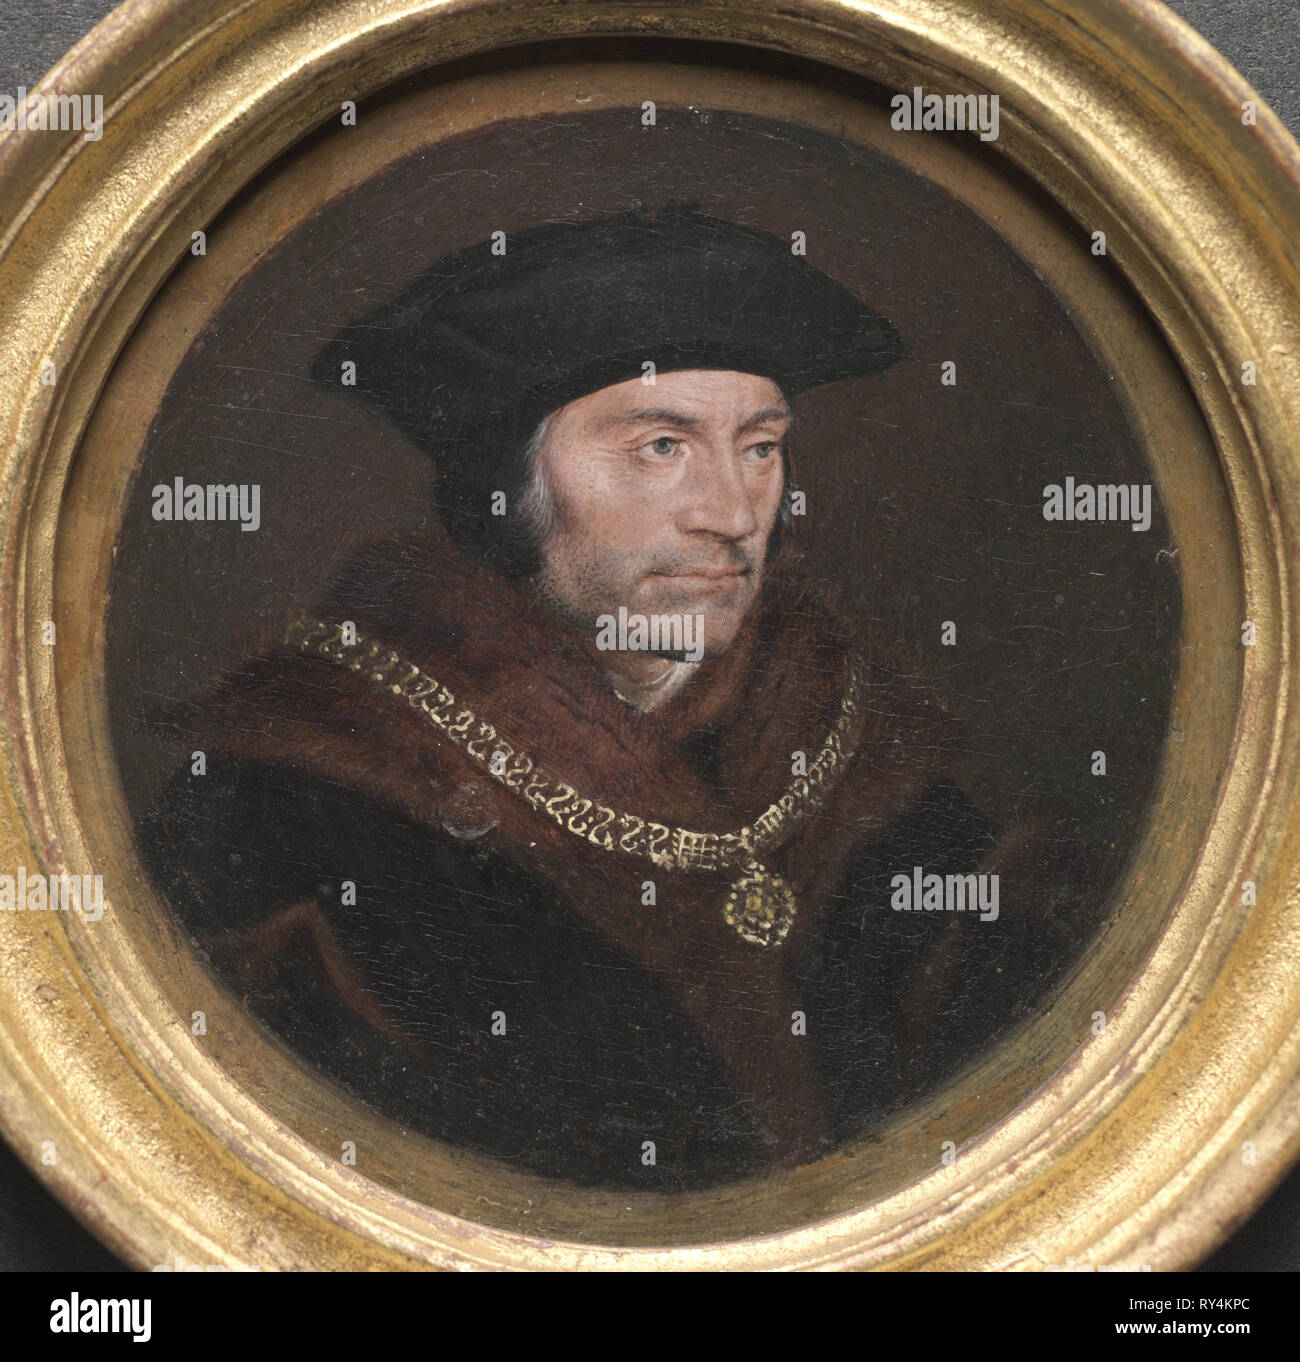 Portrait of Sir Thomas More, 17th century. Follower of Hans Holbein (German, 1497/98-1543). Oil on wood in a gilt wood frame; framed: 8.6 x 8.6 x 1.3 cm (3 3/8 x 3 3/8 x 1/2 in.); diameter: 6.5 cm (2 9/16 in.); unframed: 6.7 x 6.4 cm (2 5/8 x 2 1/2 in.); diameter of frame: 8 cm (3 1/8 in Stock Photo